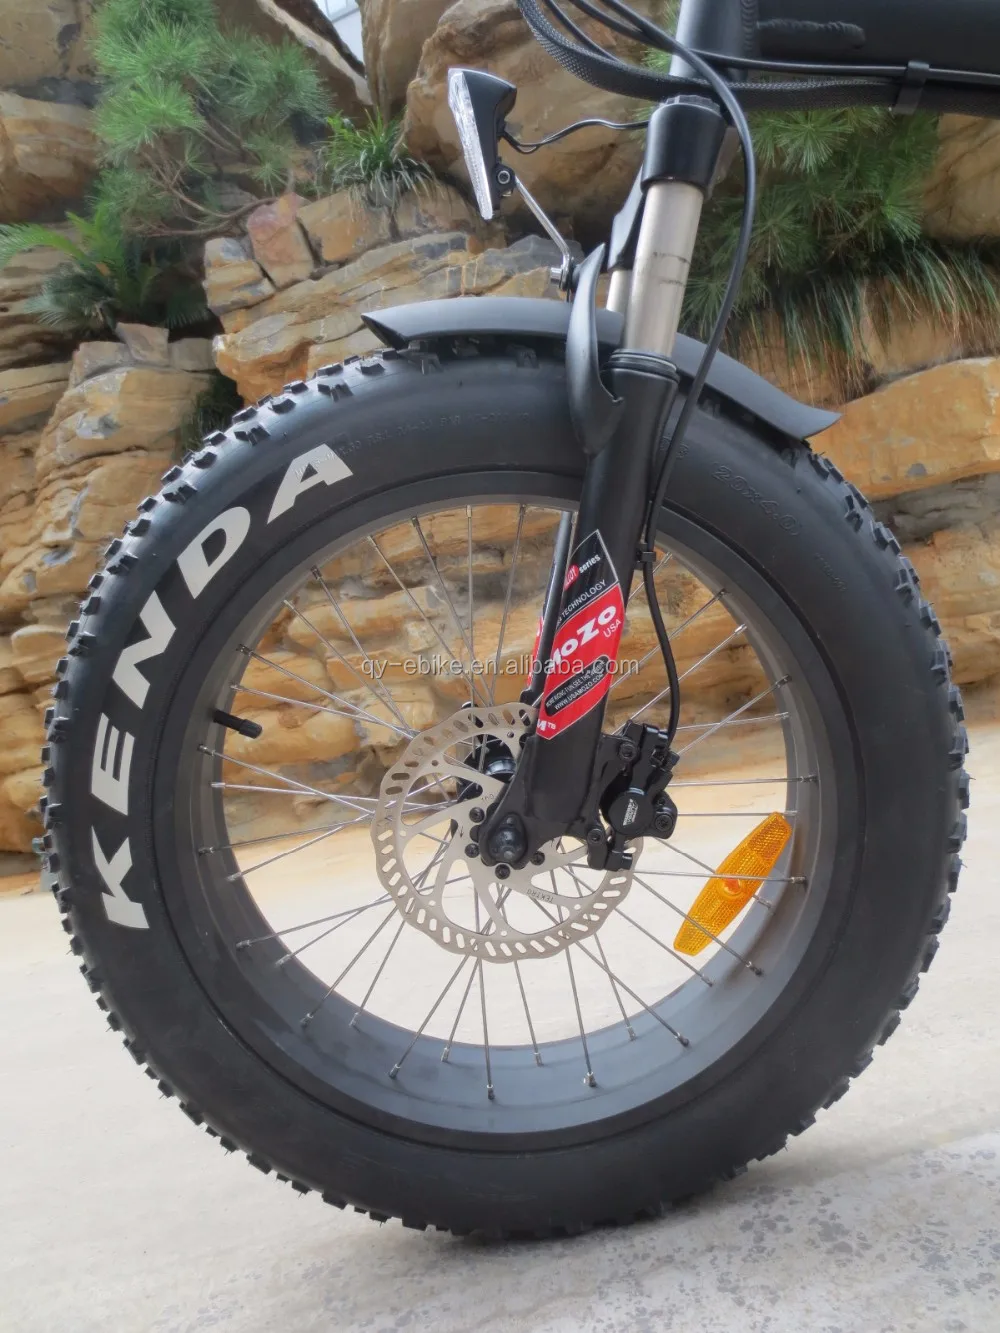 20x4 bicycle tire